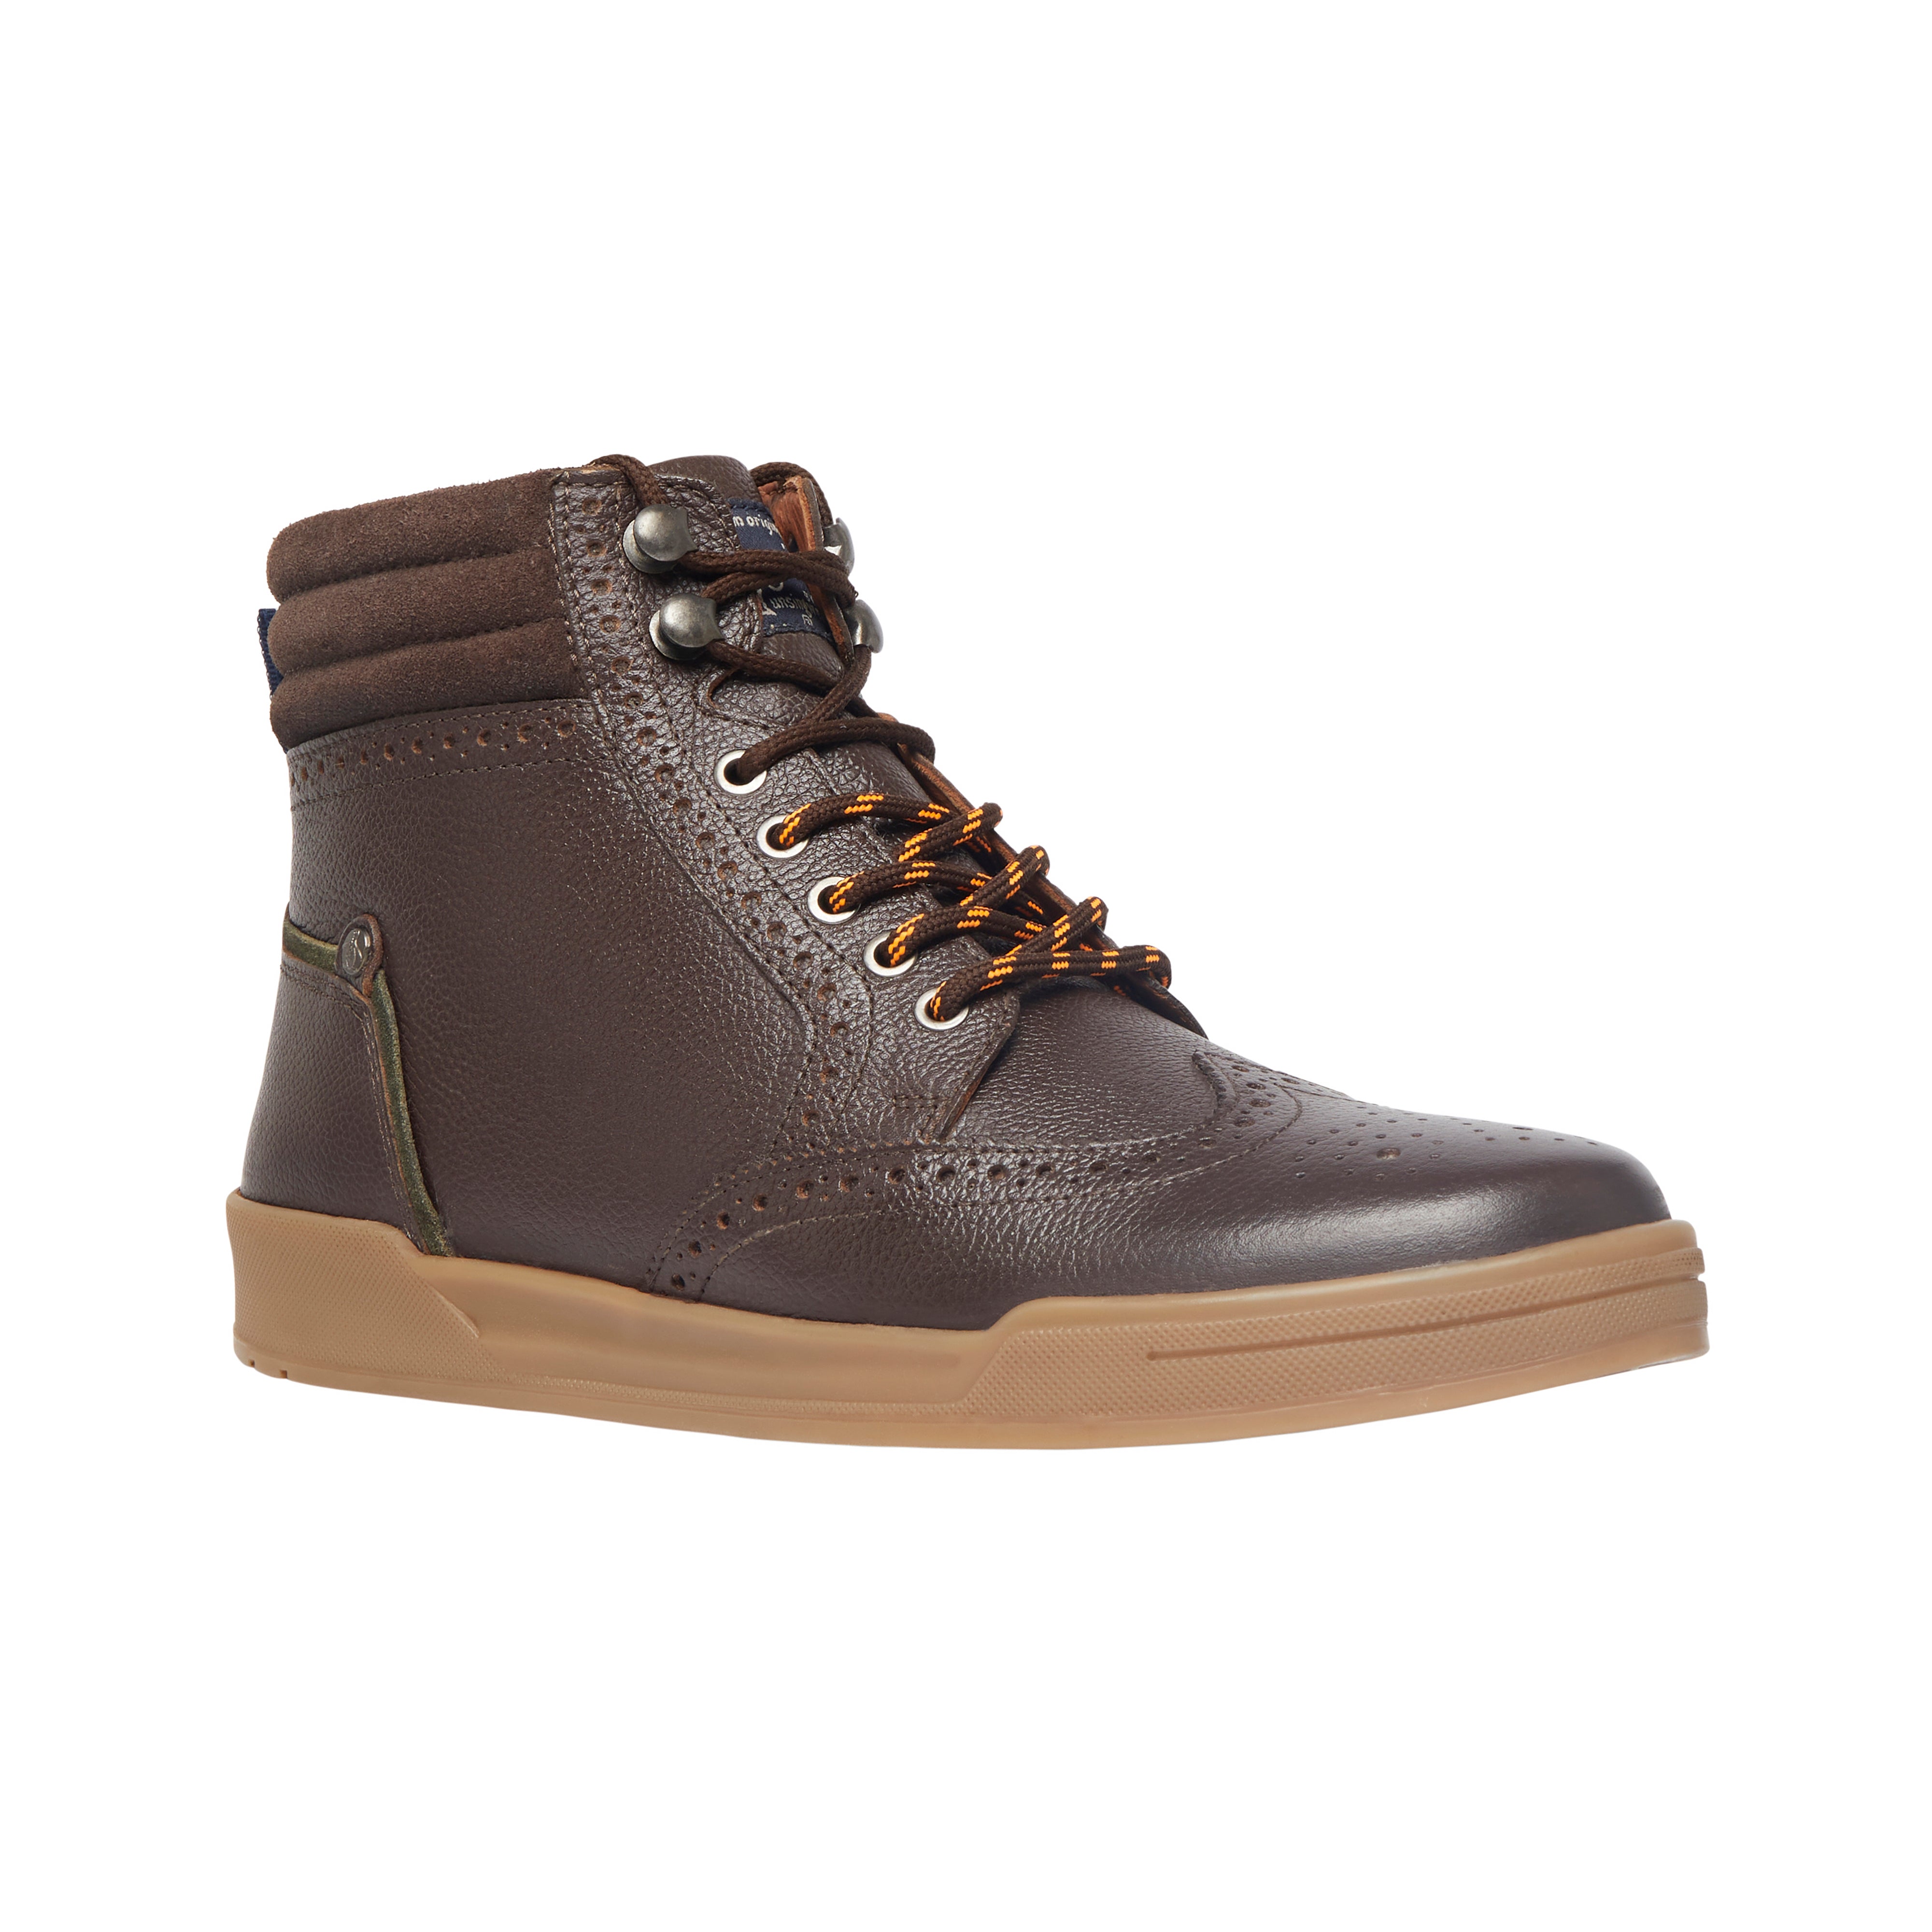 View Military Boot In Leather Brown information